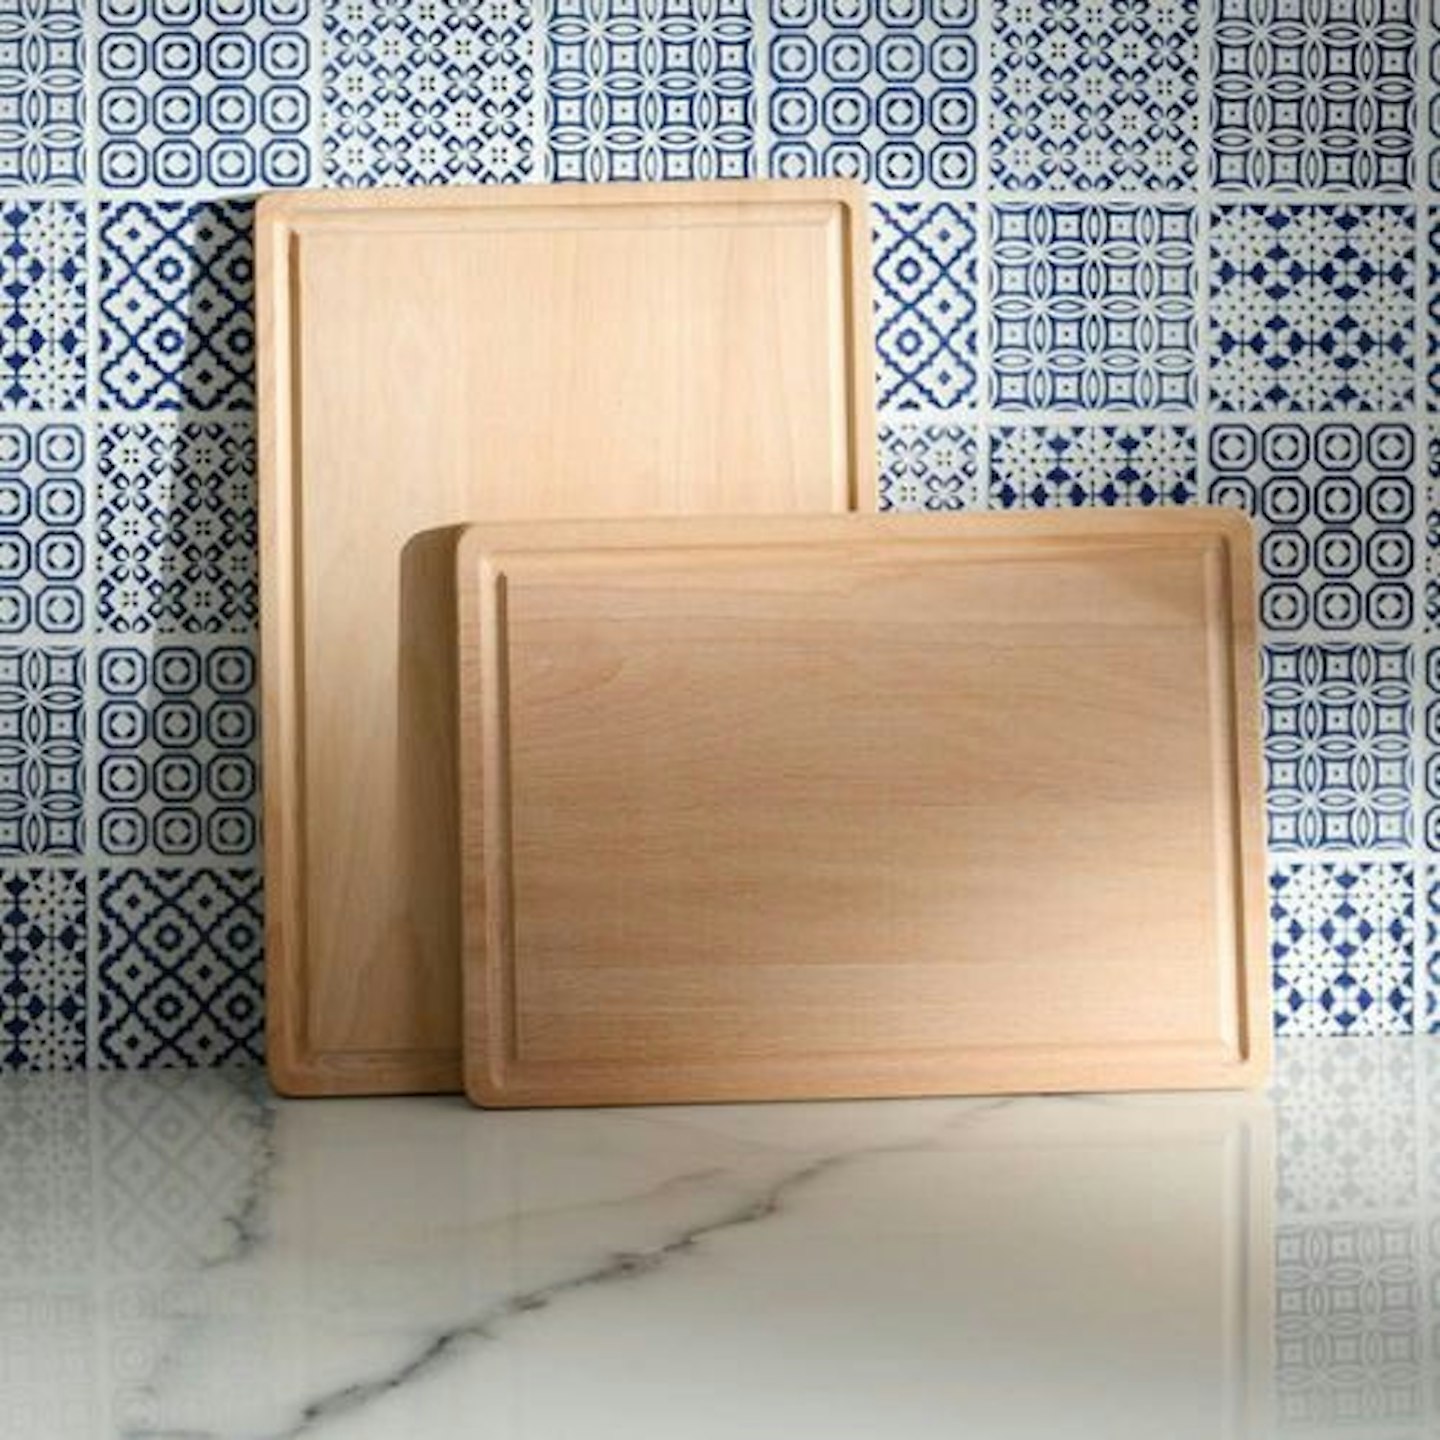 ProCook Wooden Chopping Board with Groove Set